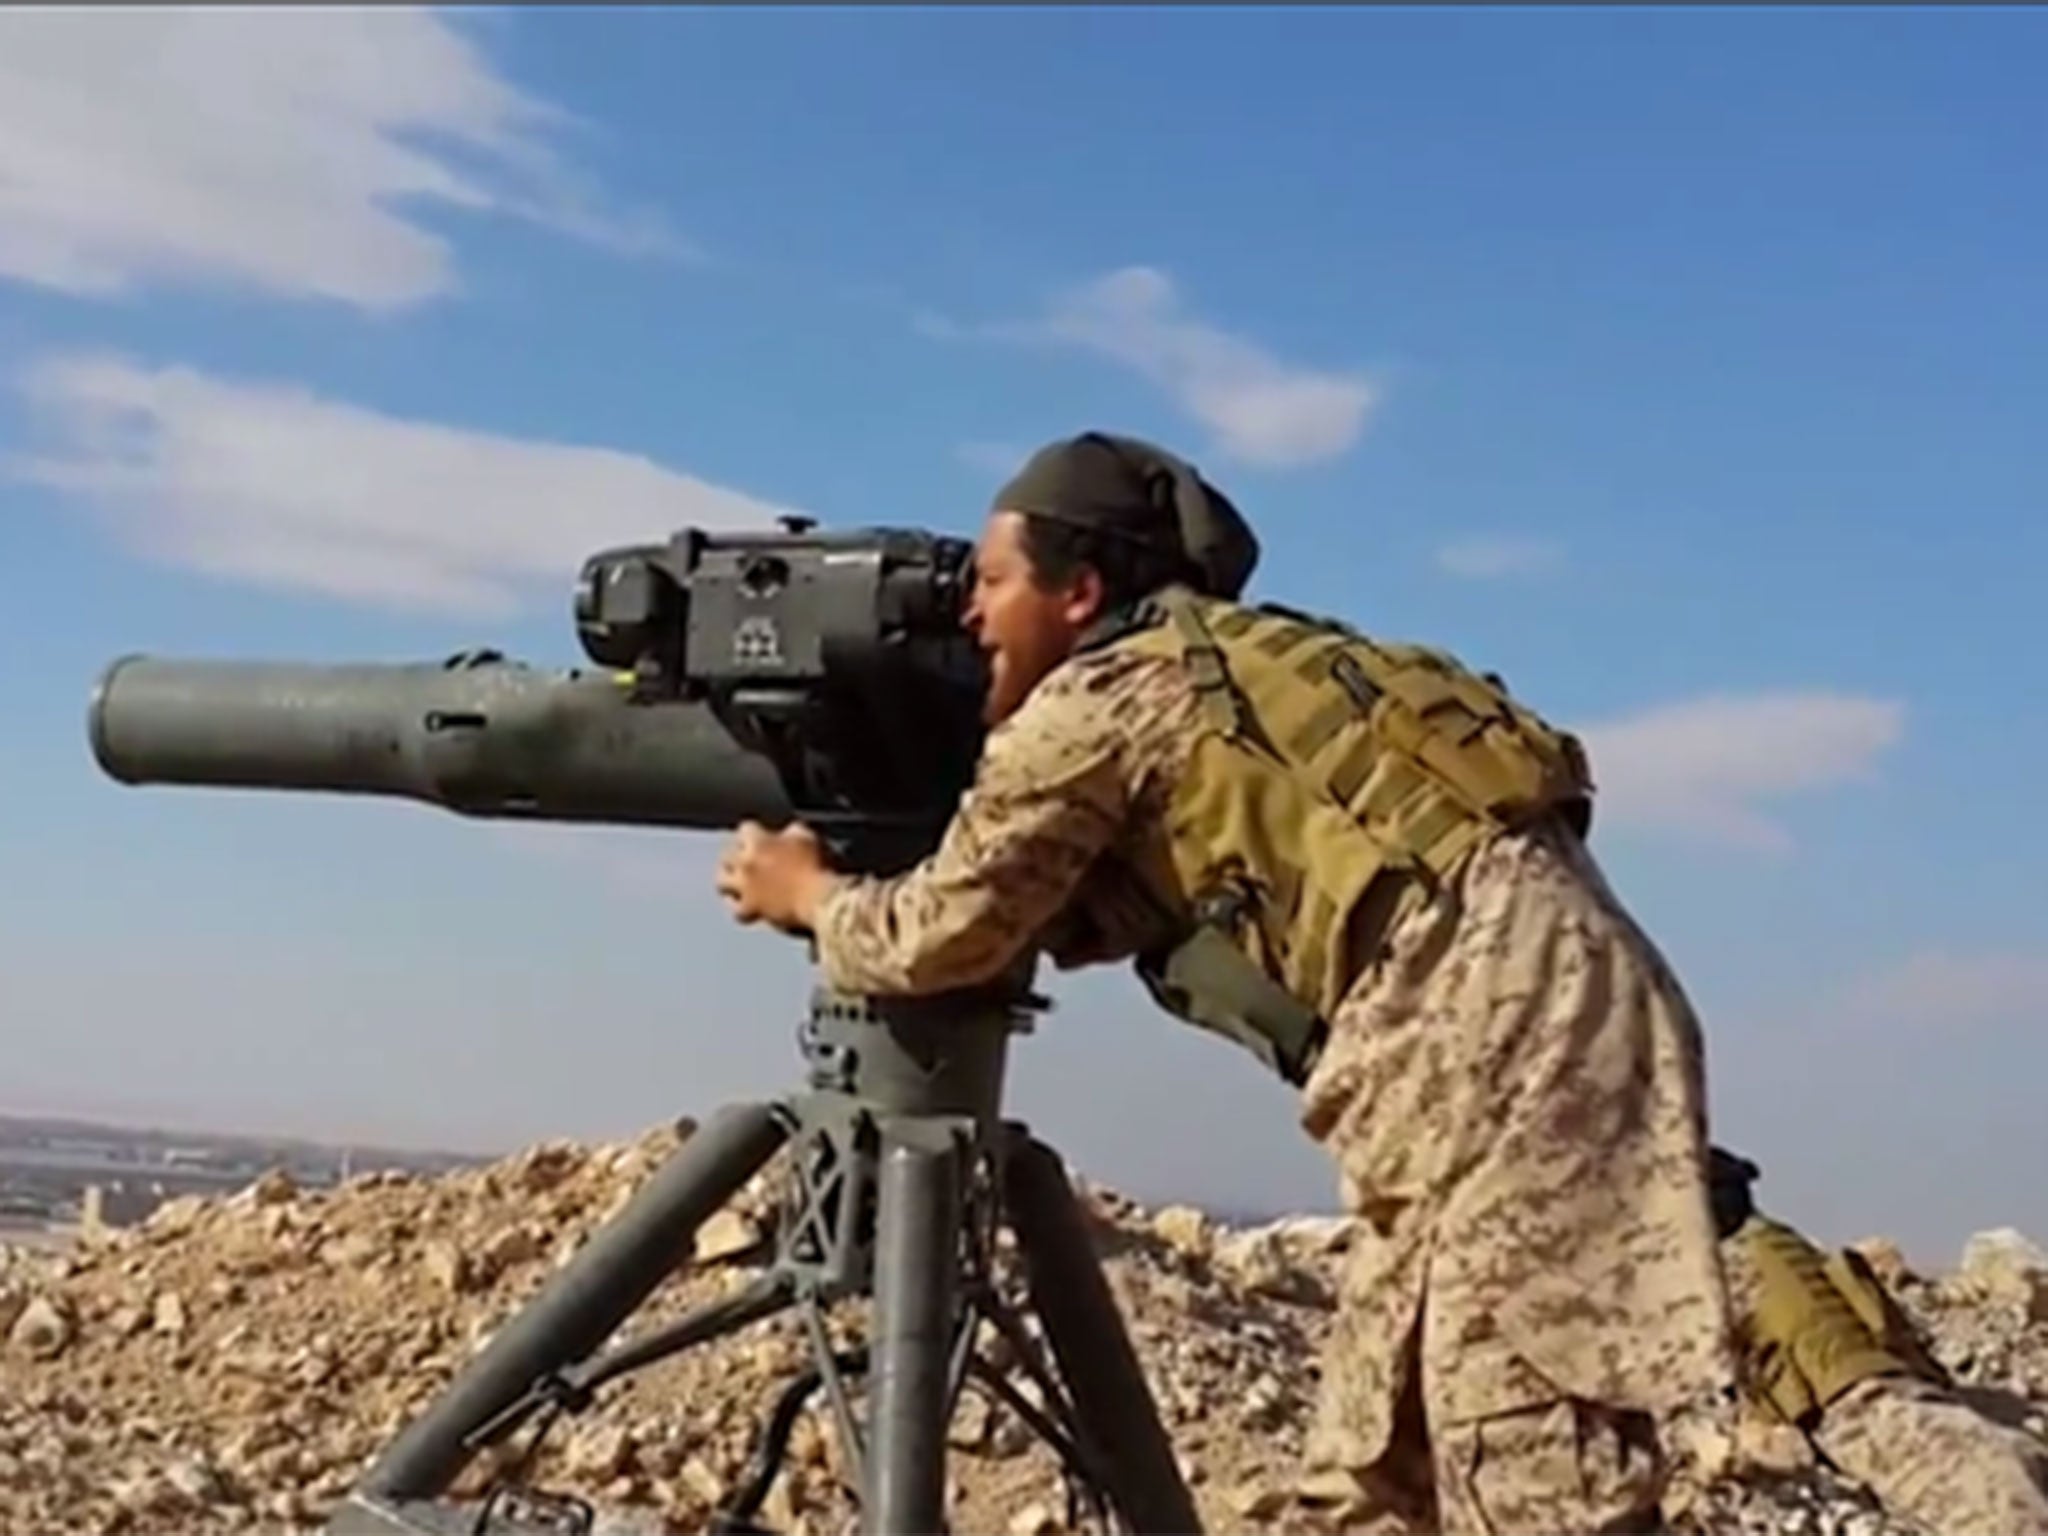 An Isis video boasting of its capture of Palmyra showed a militant operating this American-made anti-tank missile launcher